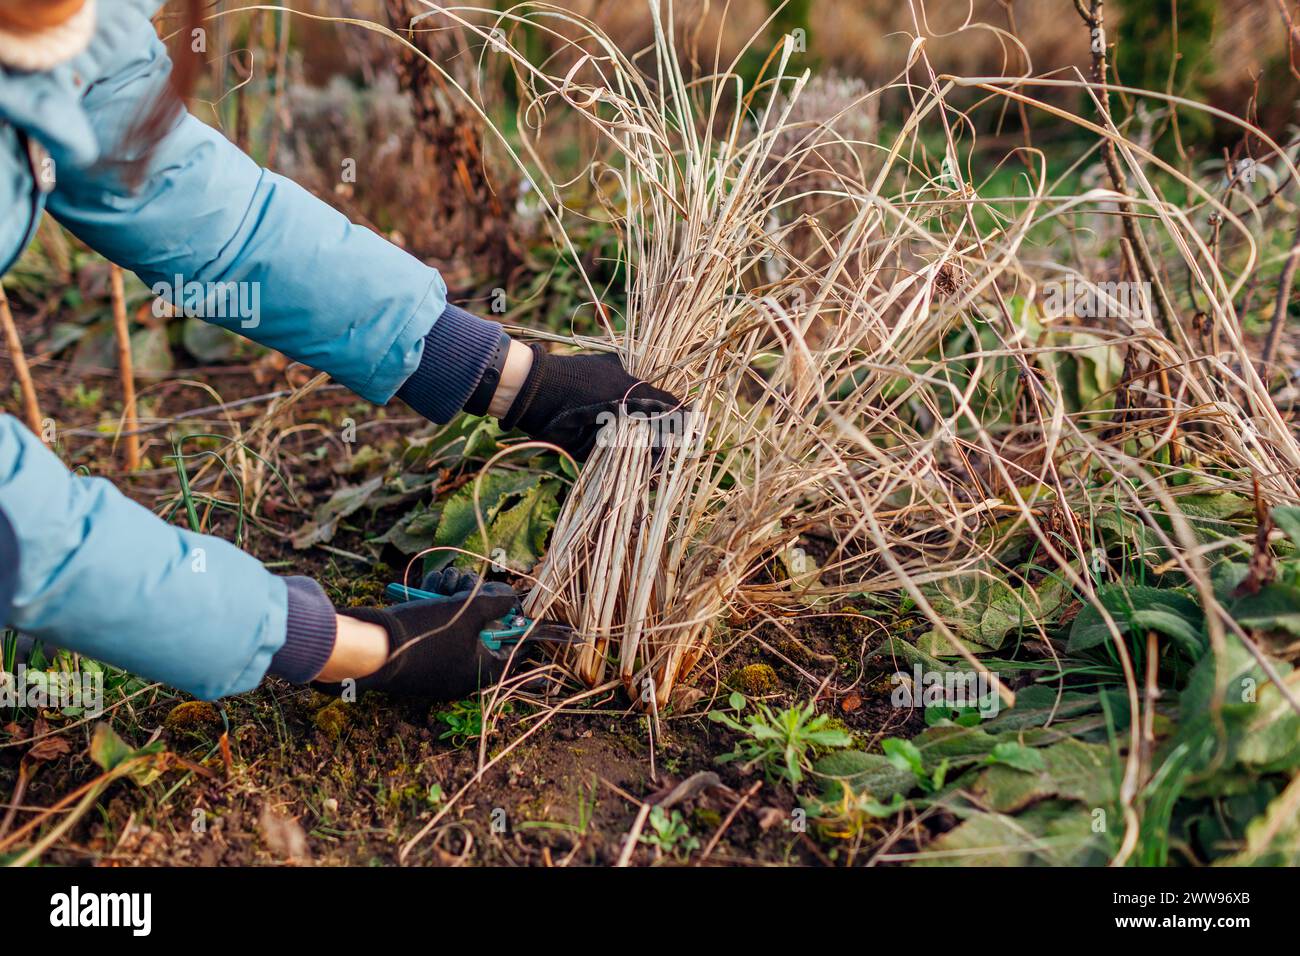 Cutting back ornamental grasses in spring garden. Gardener pruning pennisetum using secateur. Worker taking care of fountain grass Stock Photo